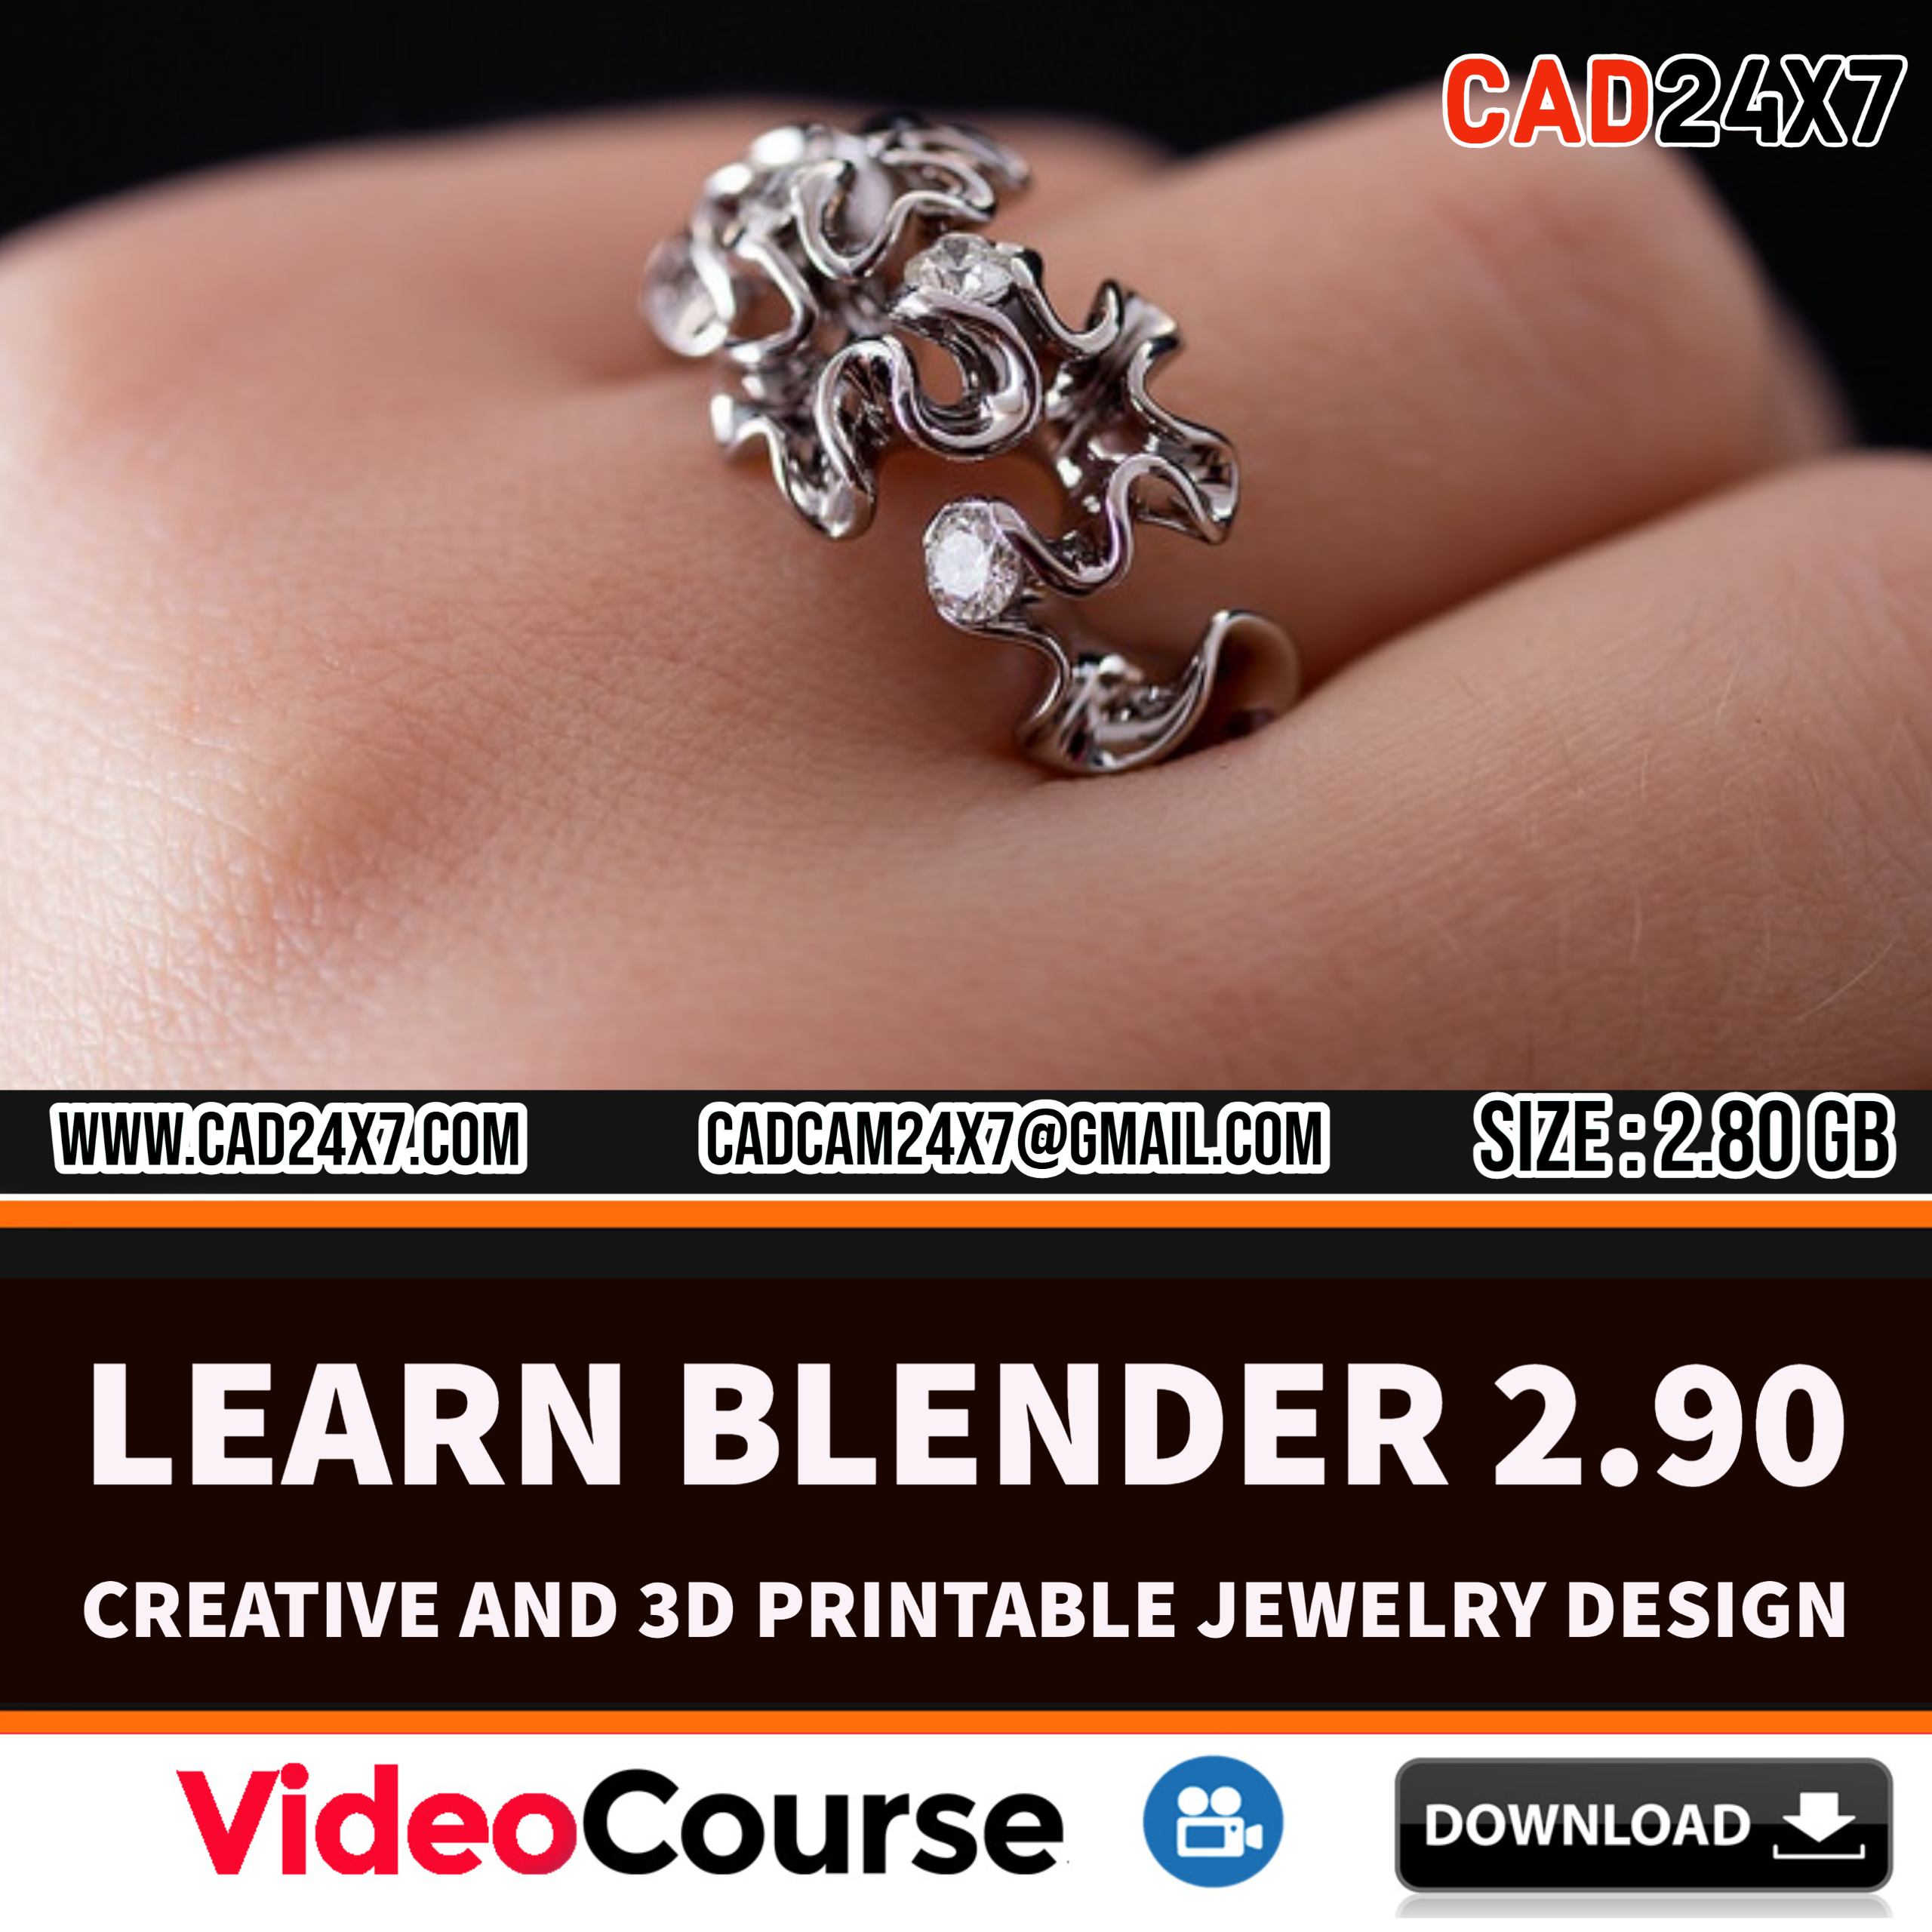 Learn Blender 2.90 Creative and 3D Printable Jewelry Design